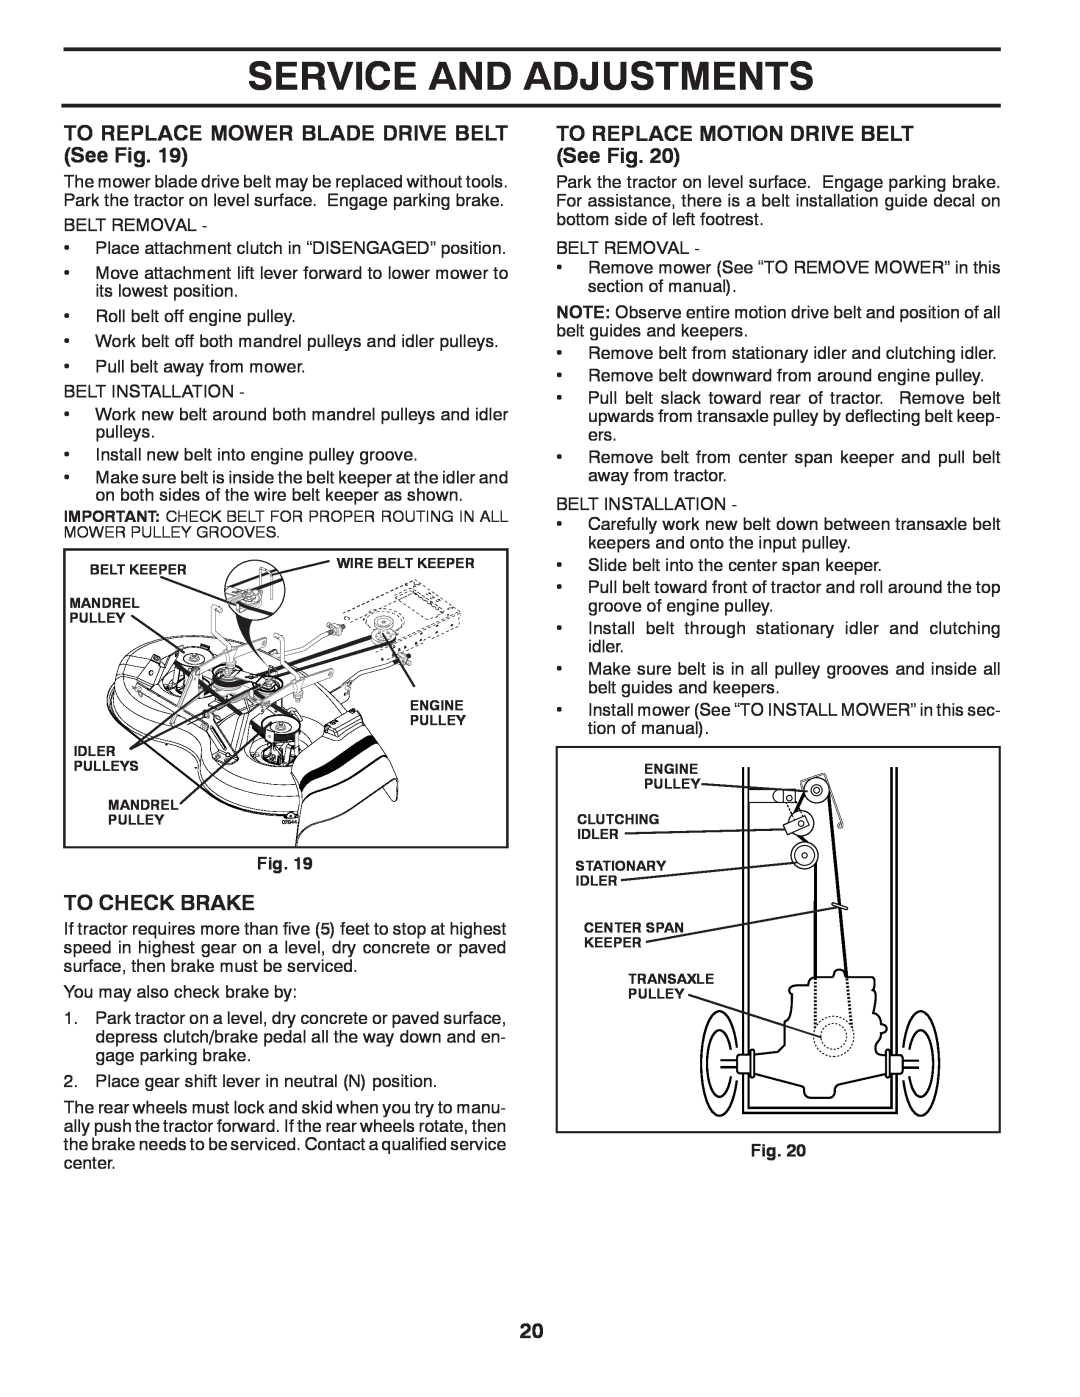 Poulan PO12538LT warranty TO REPLACE MOWER BLADE DRIVE BELT See Fig, To Check Brake, TO REPLACE MOTION DRIVE BELT See Fig 